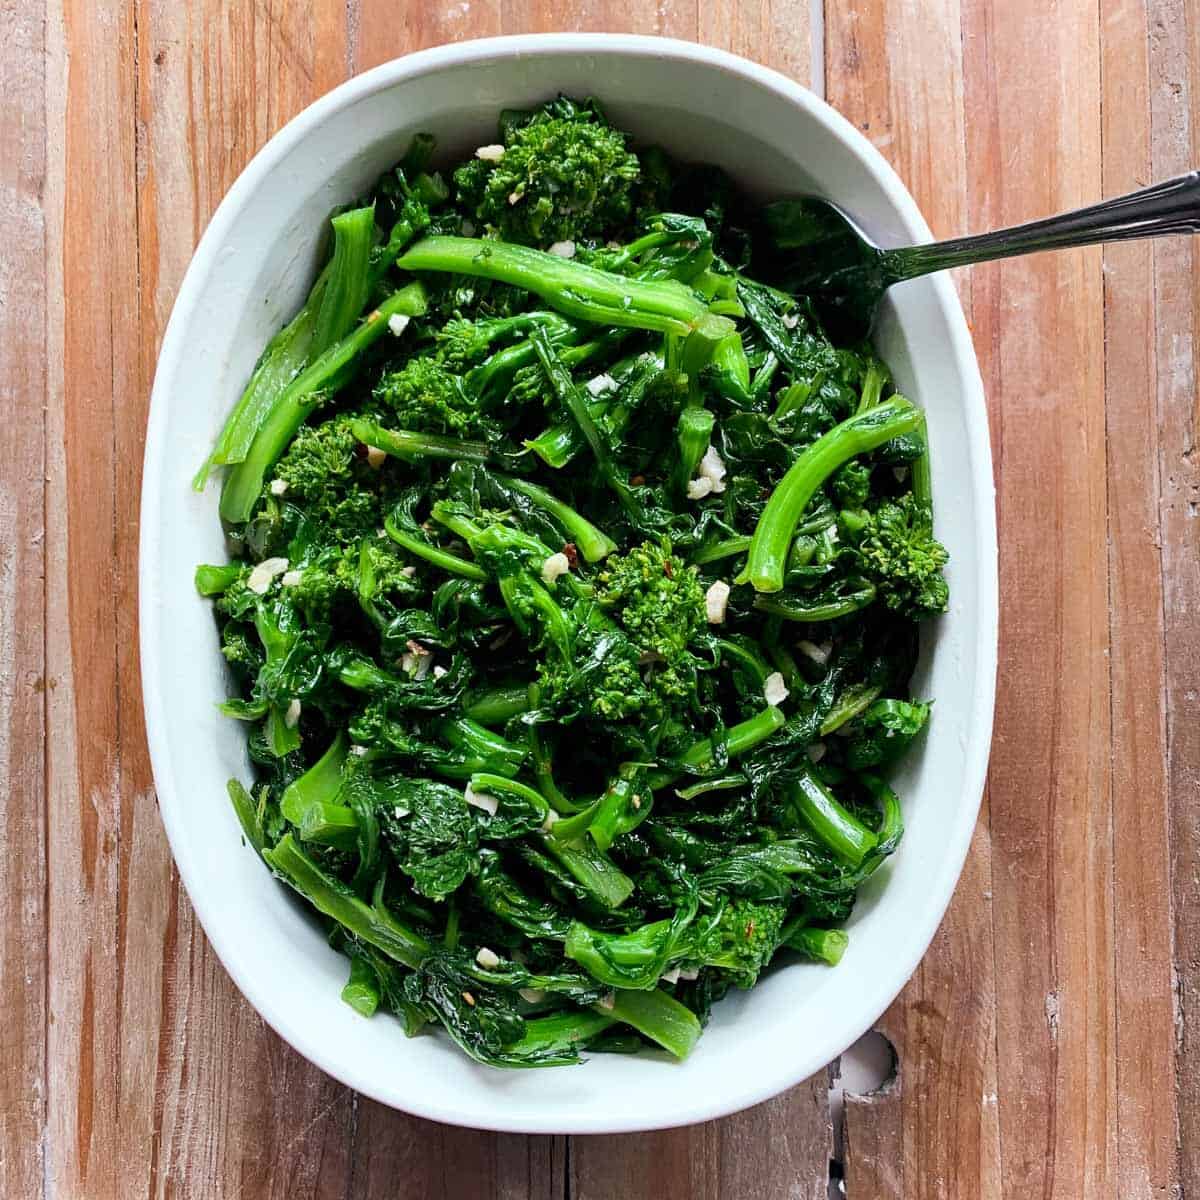 overhead view of cooked broccoli rabe in white casserole dish on wooden background Broccoli rabe is a great change of pace for your weeknight veggie rotation. And with just a handful of ingredients, it's a breeze to make!